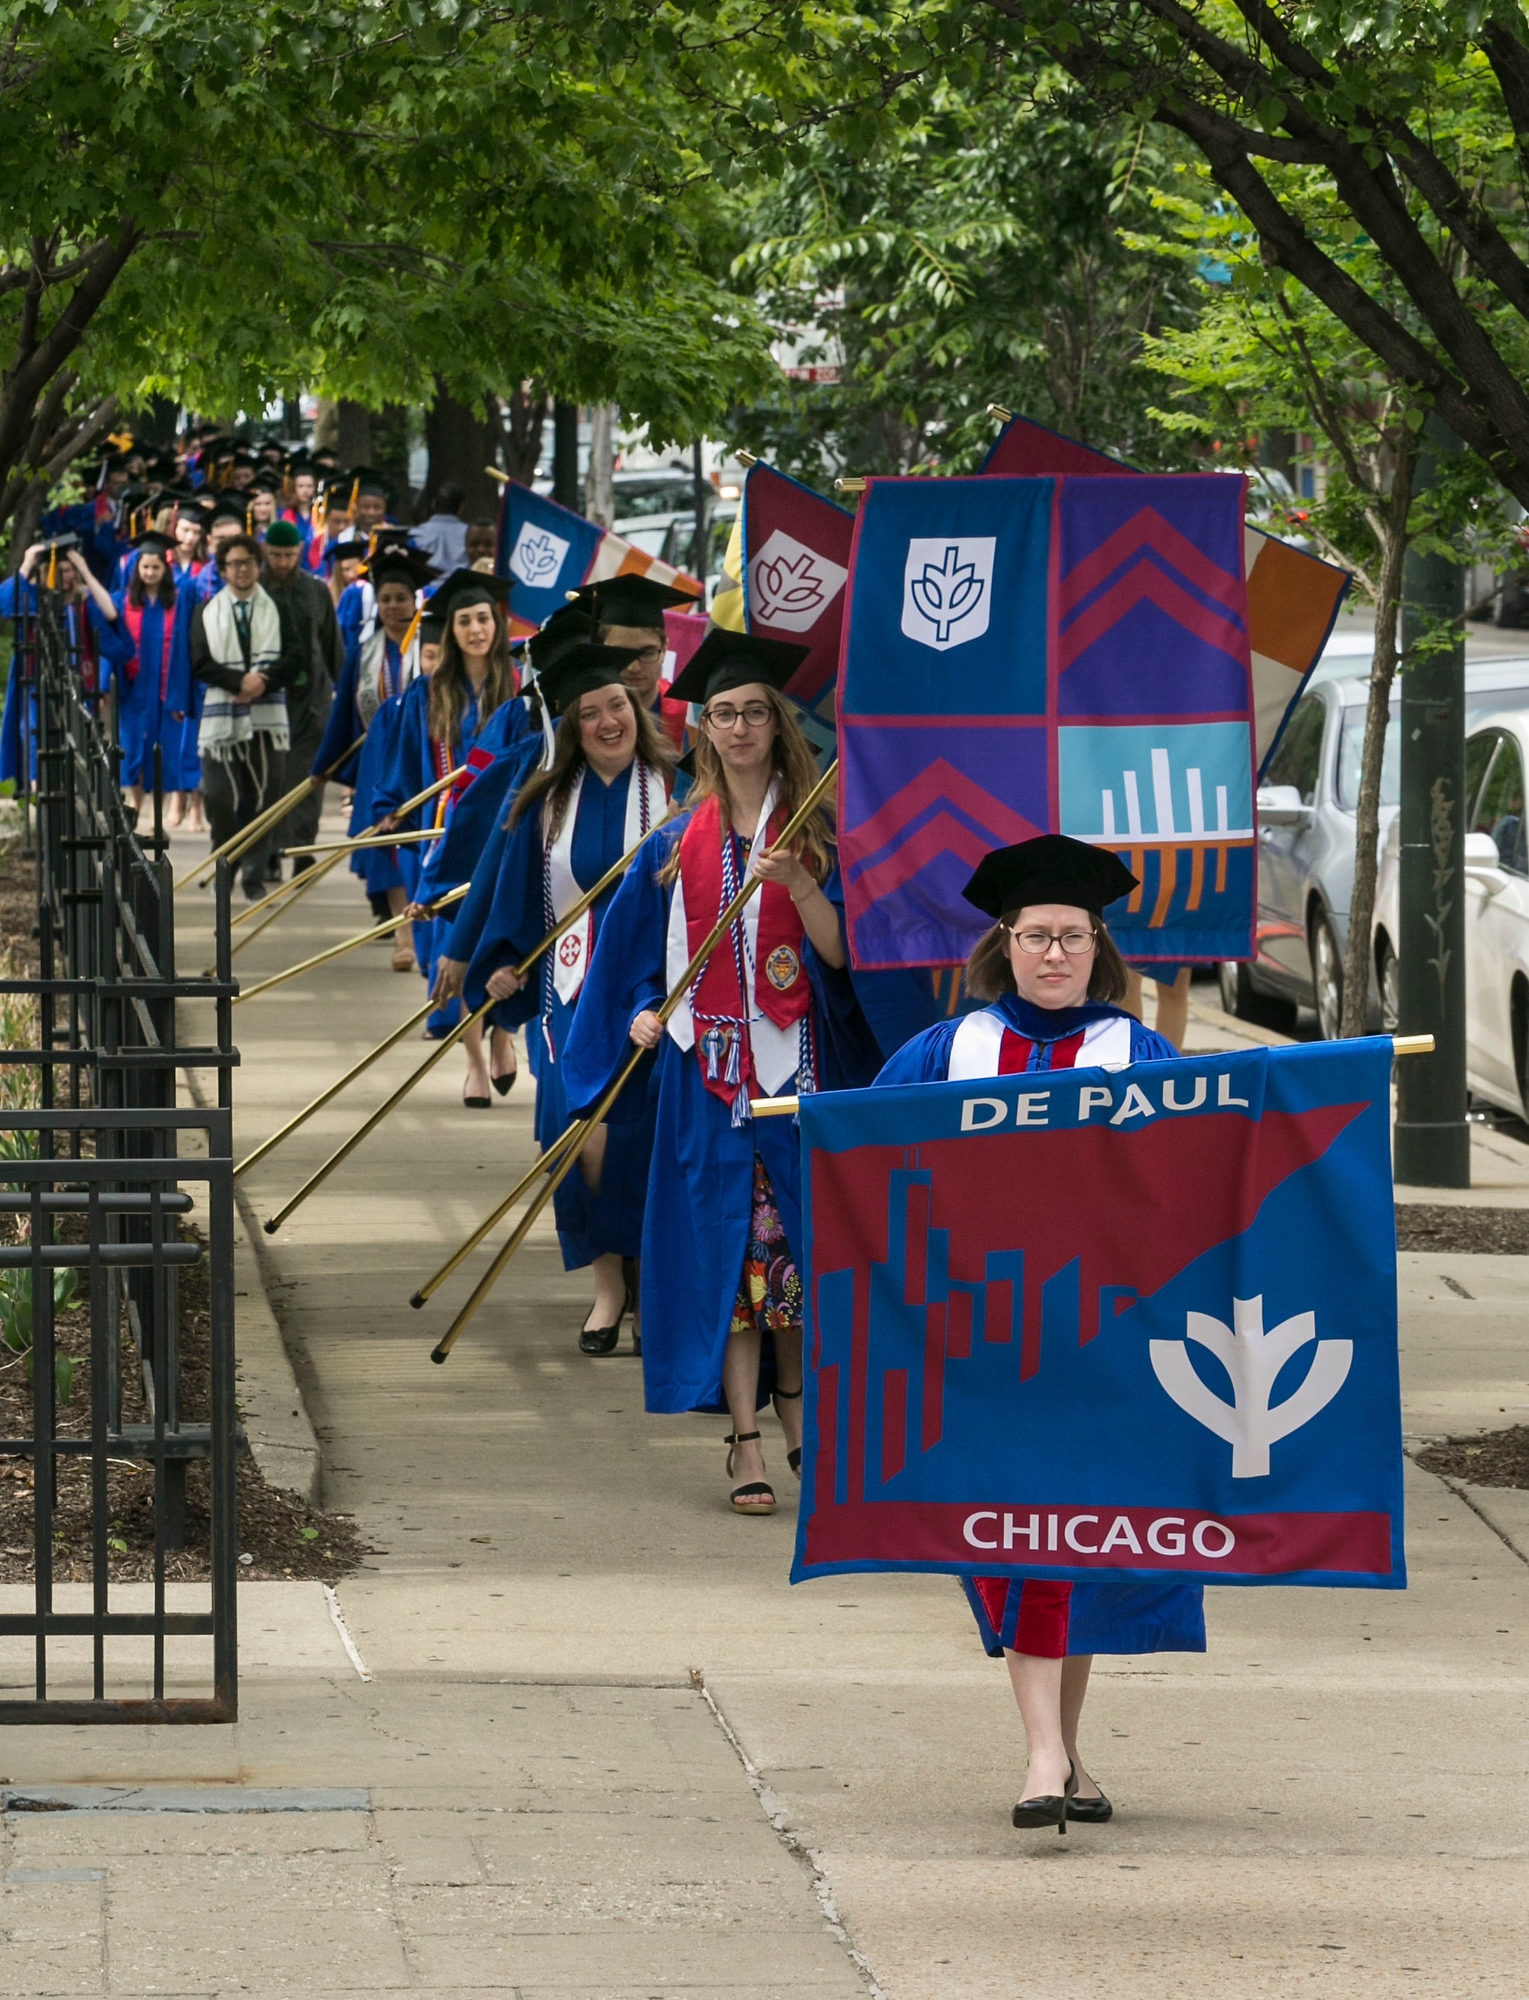 Carrying DePaul's school and college banners, students make their way into the St. Vincent de Paul Parish Church for the annual Baccalaureate Mass. (DePaul University/Jamie Moncrief)